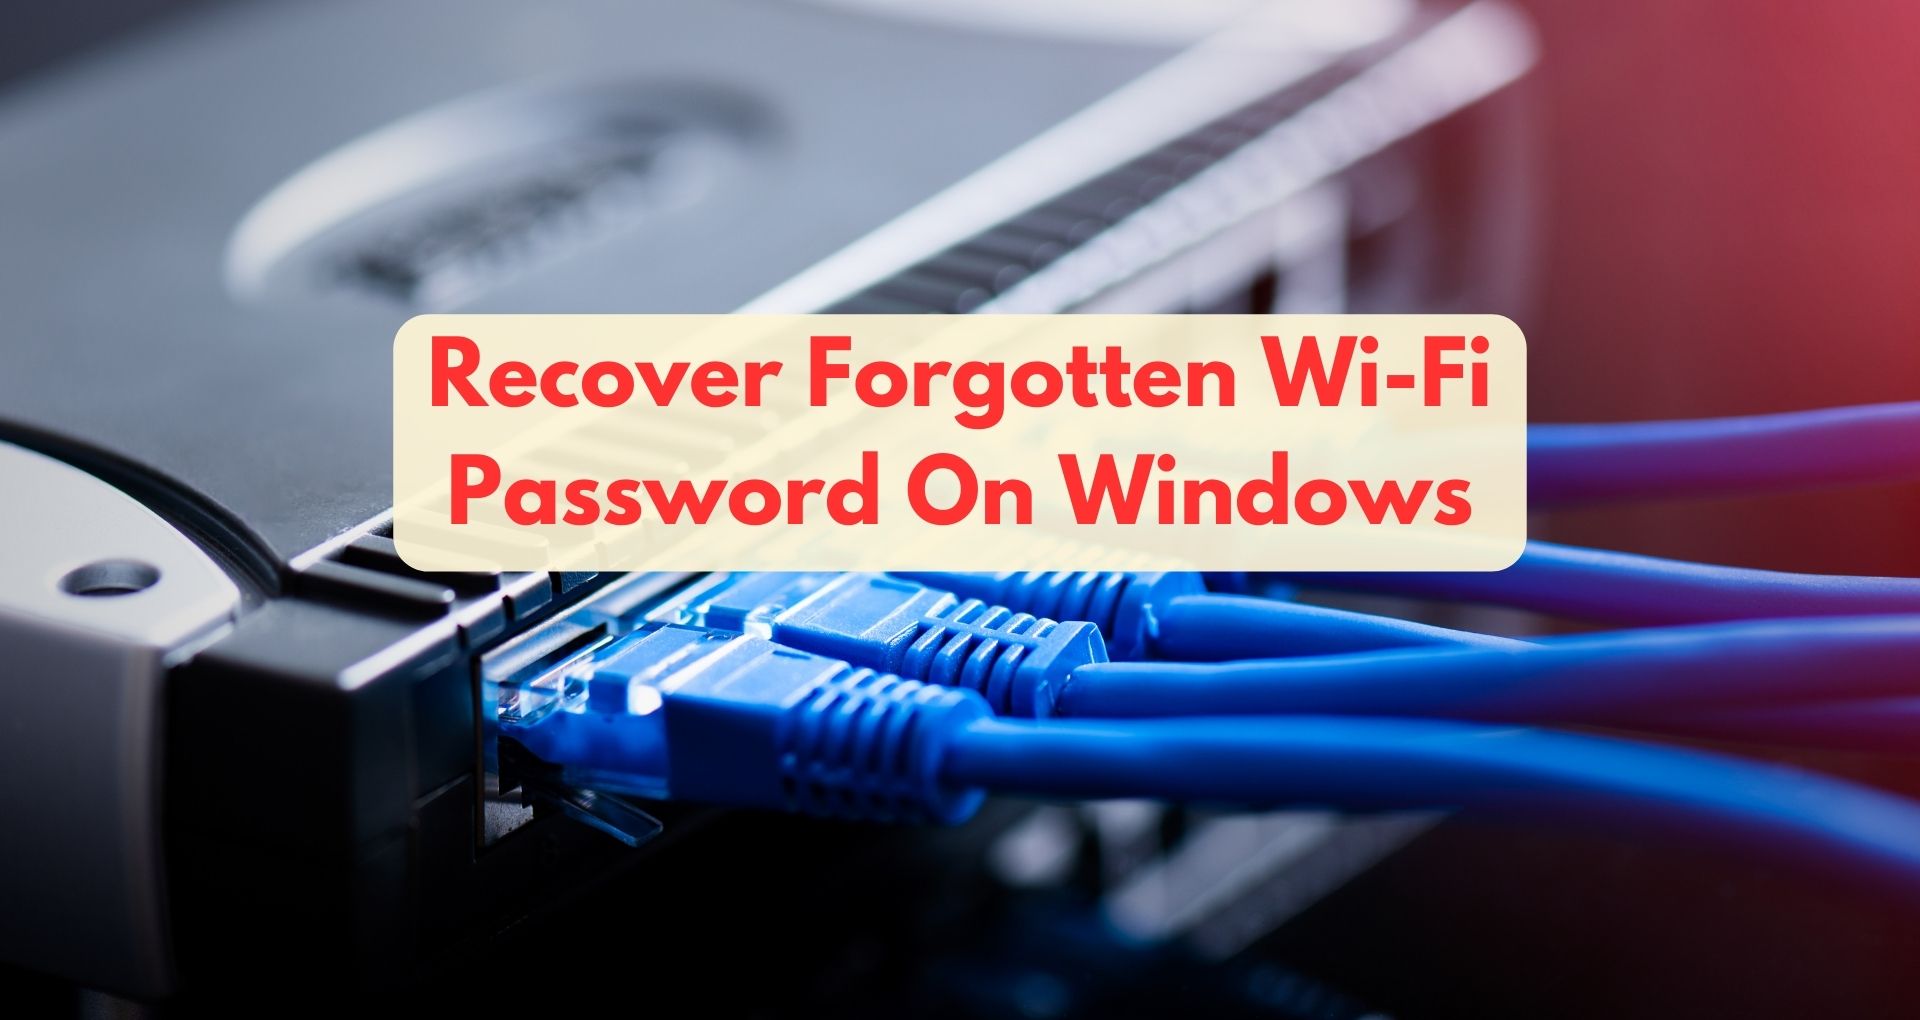 How To Recover Forgotten Wi-Fi Password On Windows?